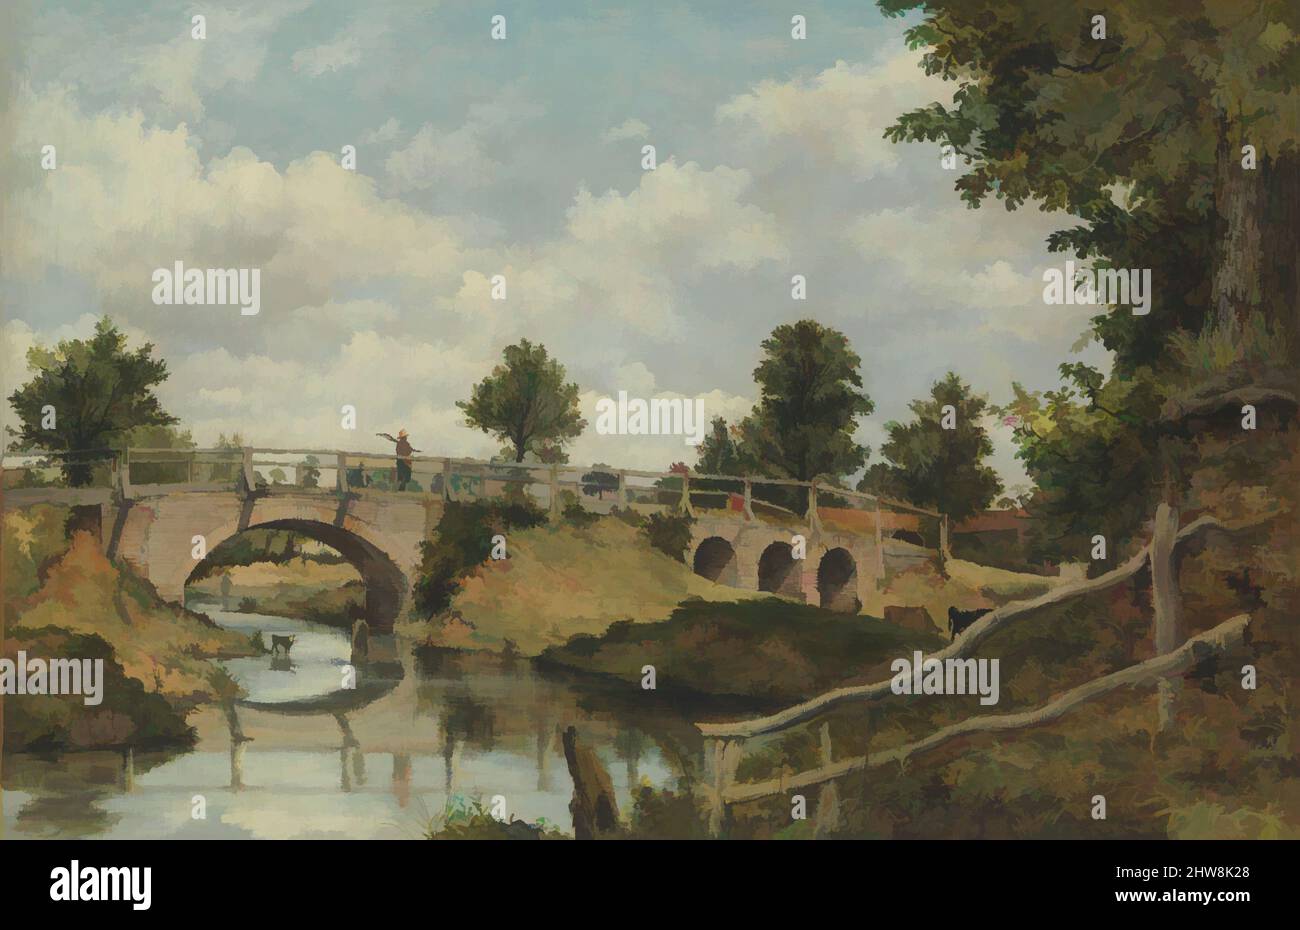 Art inspired by An Old Bridge at Hendon, Middlesex, ca. 1828, Oil on canvas, 21 3/4 x 32 3/4 in. (55.2 x 83.2 cm), Paintings, Frederick Waters Watts (British, Bath 1800–1870 Hampstead), A follower of John Constable, Watts exhibited widely as a landscapist but ceased painting around, Classic works modernized by Artotop with a splash of modernity. Shapes, color and value, eye-catching visual impact on art. Emotions through freedom of artworks in a contemporary way. A timeless message pursuing a wildly creative new direction. Artists turning to the digital medium and creating the Artotop NFT Stock Photo